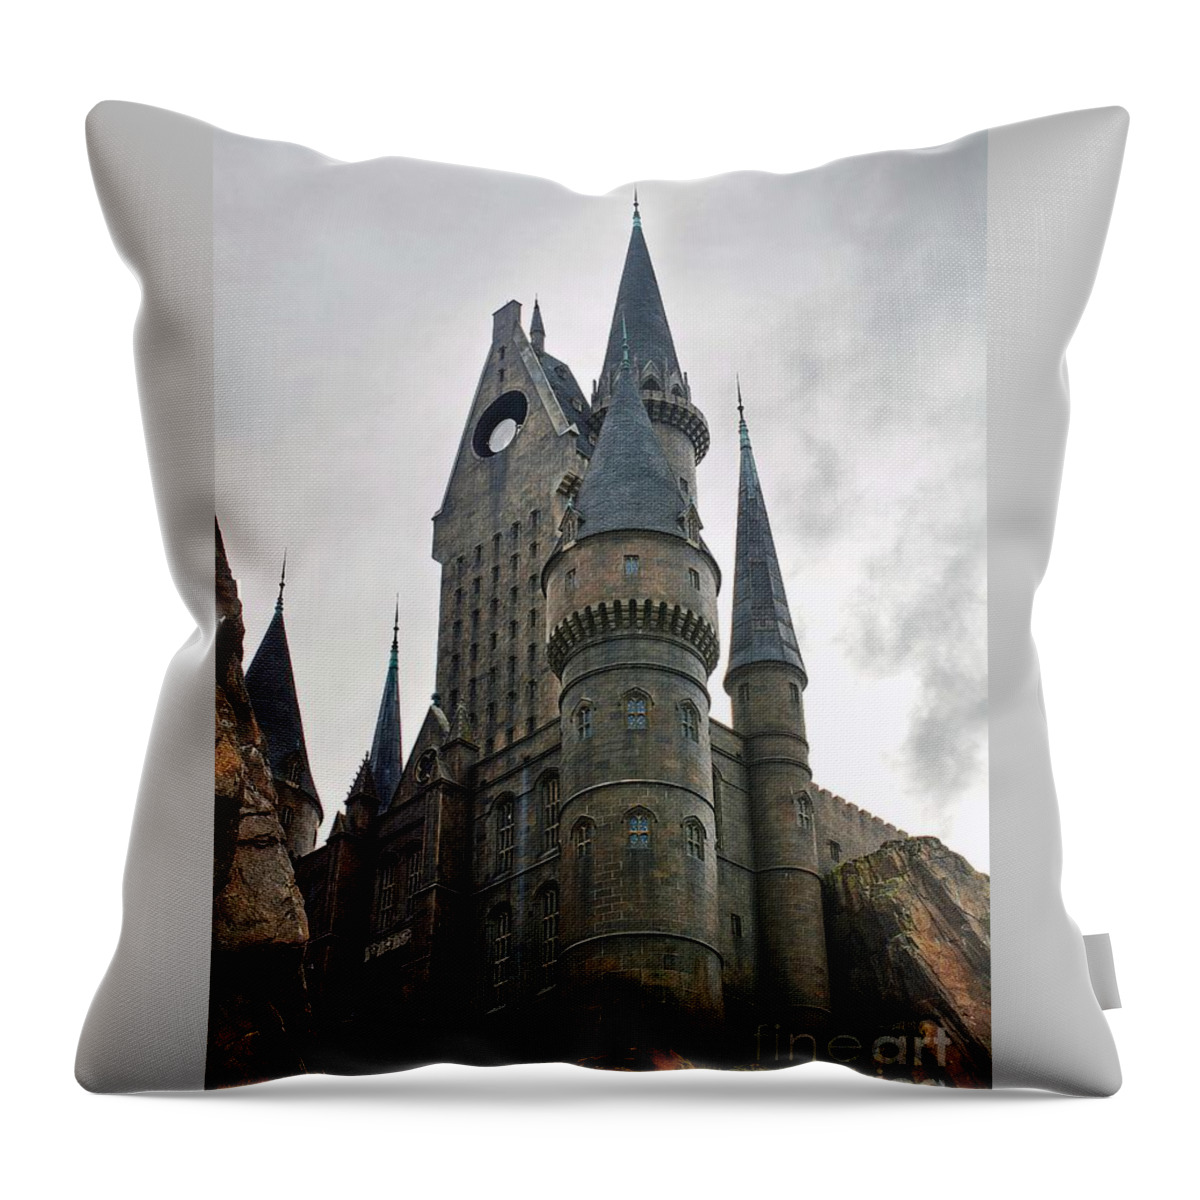 Castles Throw Pillow featuring the photograph Harry Potter Castle by Cindy Manero